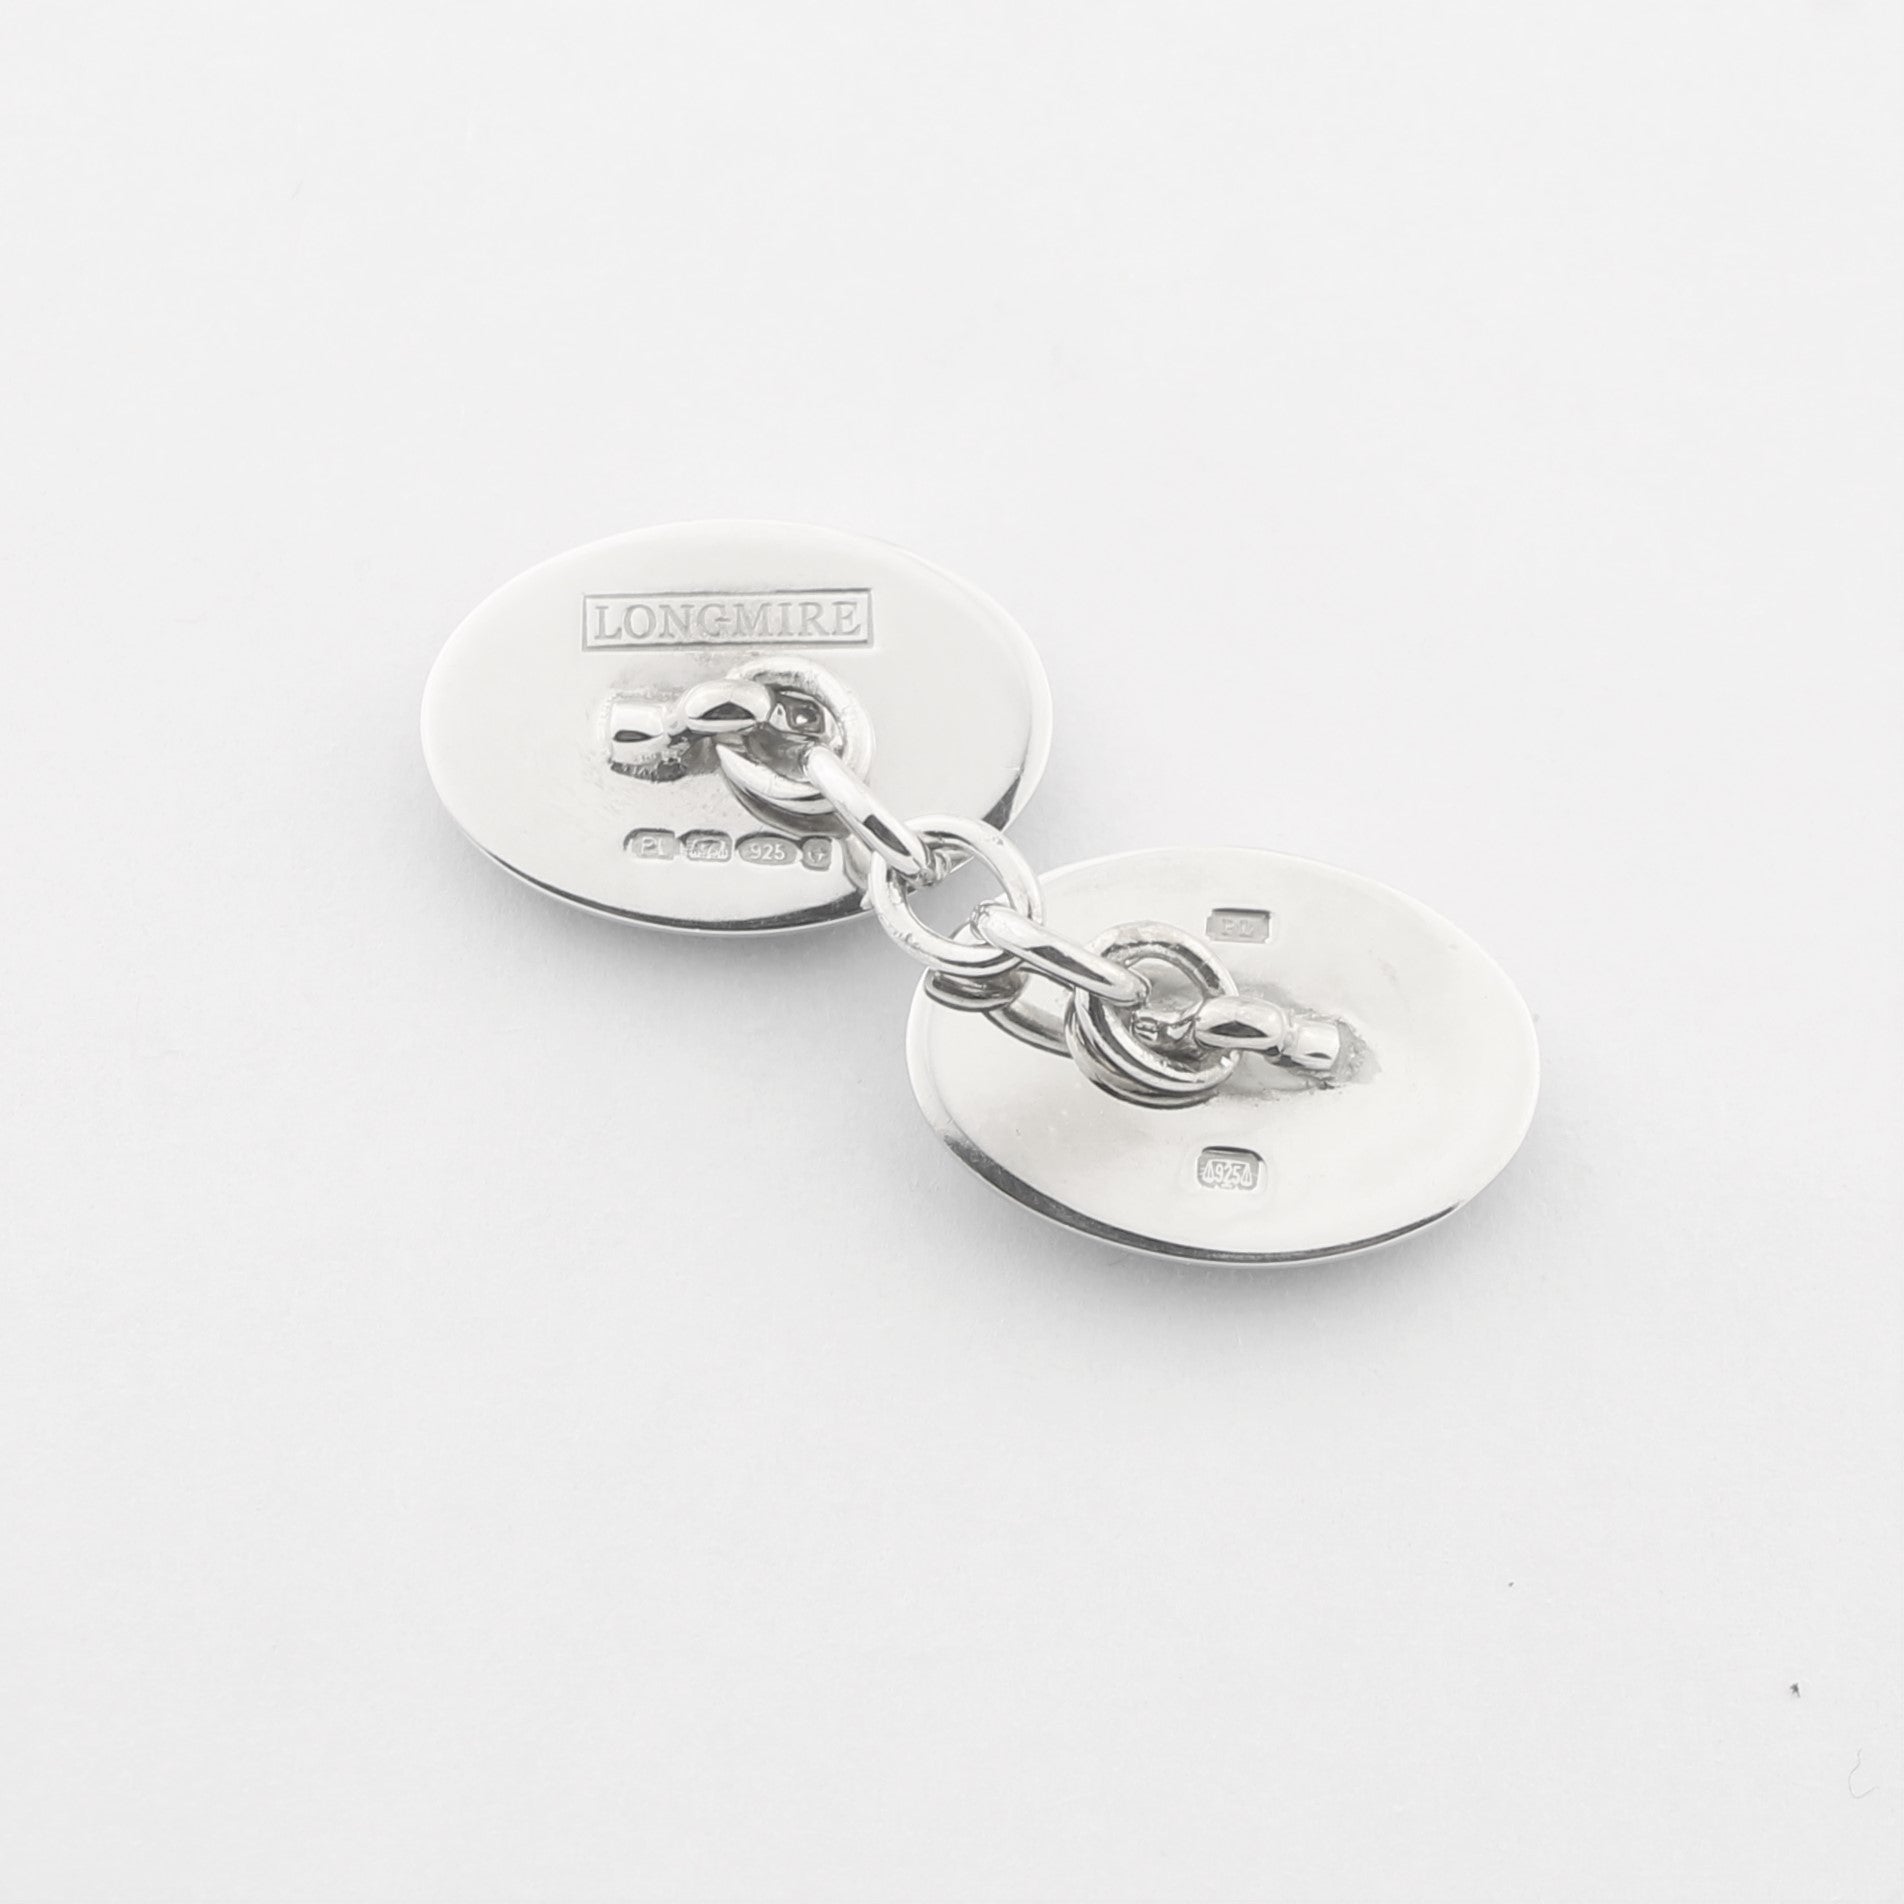 Double oval cufflinks in red and white enamel on silver - rears